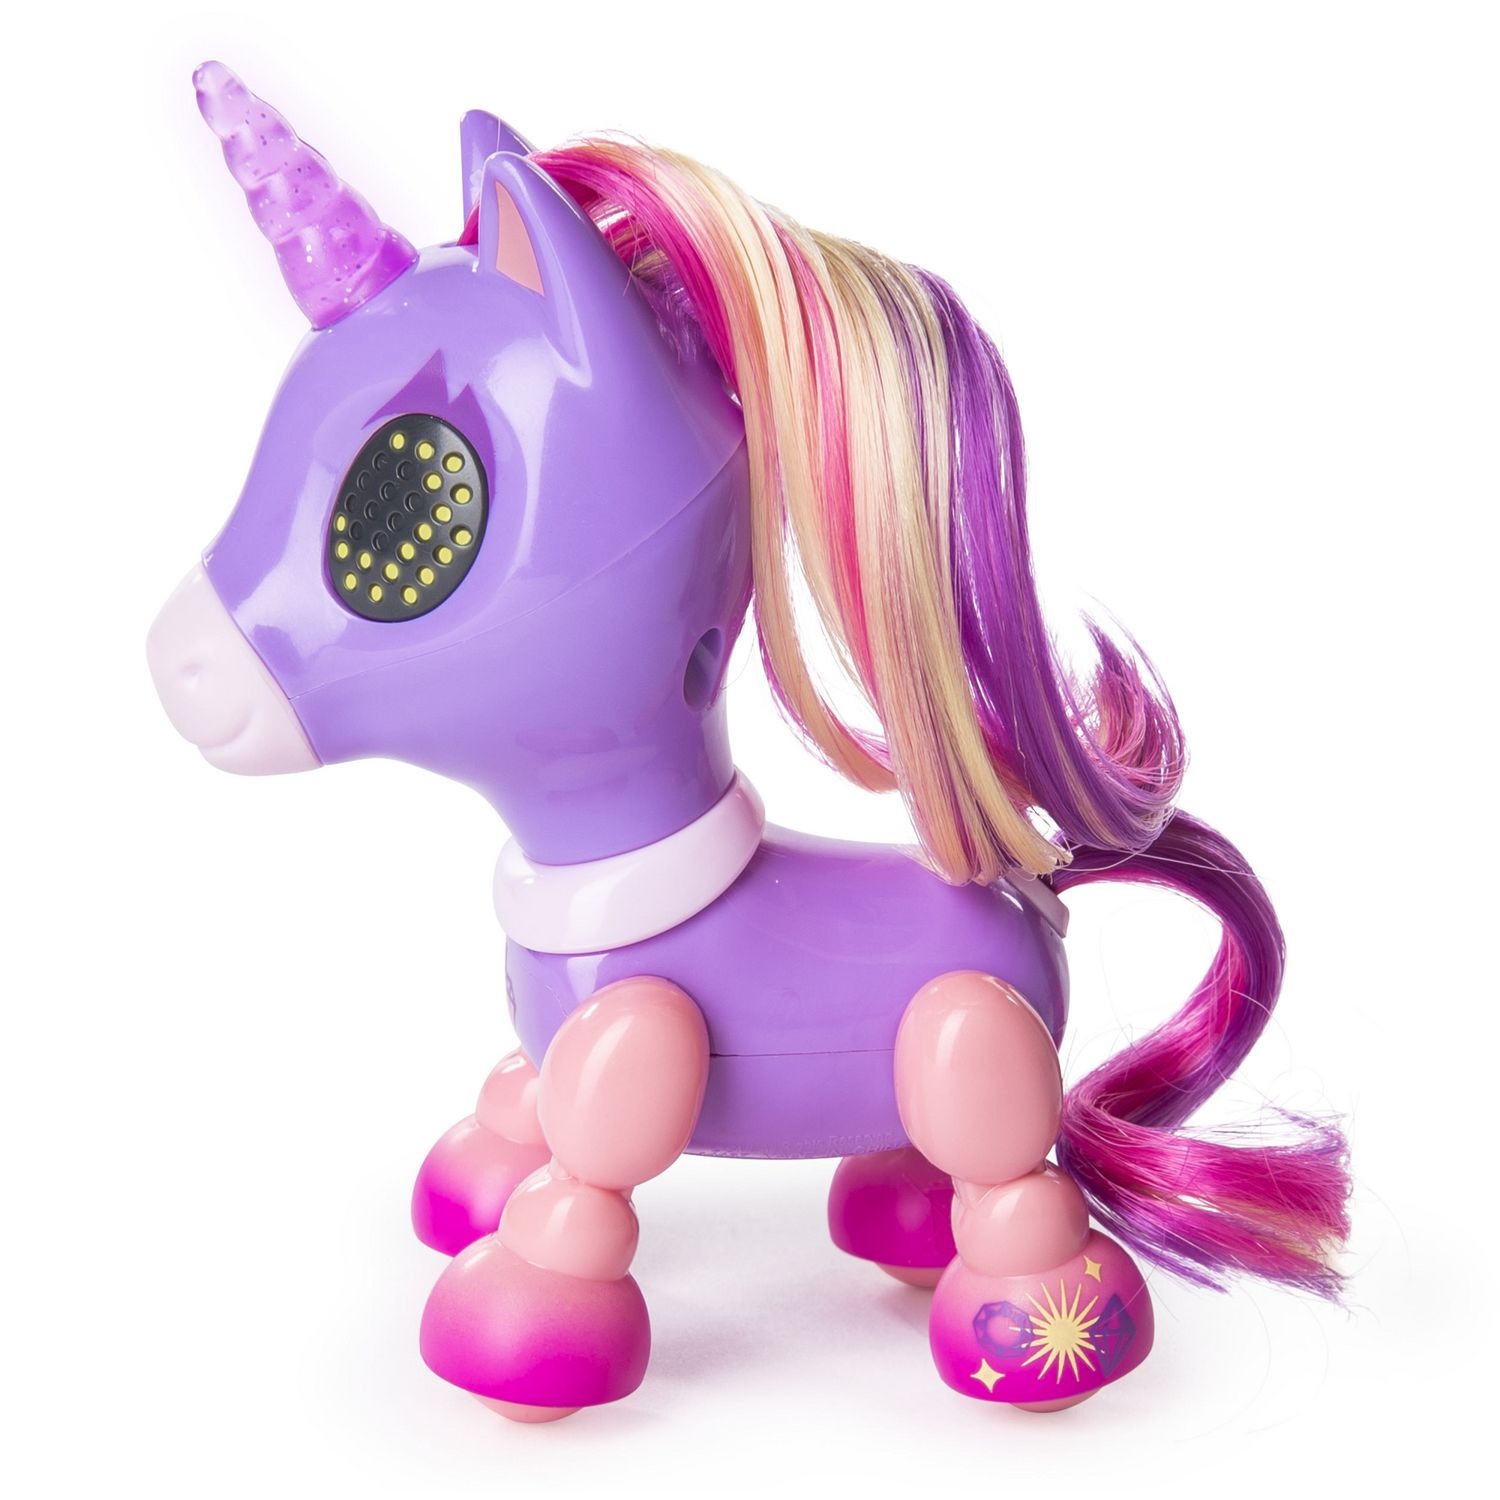 Zooner Zupps Tiny Light-Up Horn Unicorns Figure Crystal 4 Free Shipping 